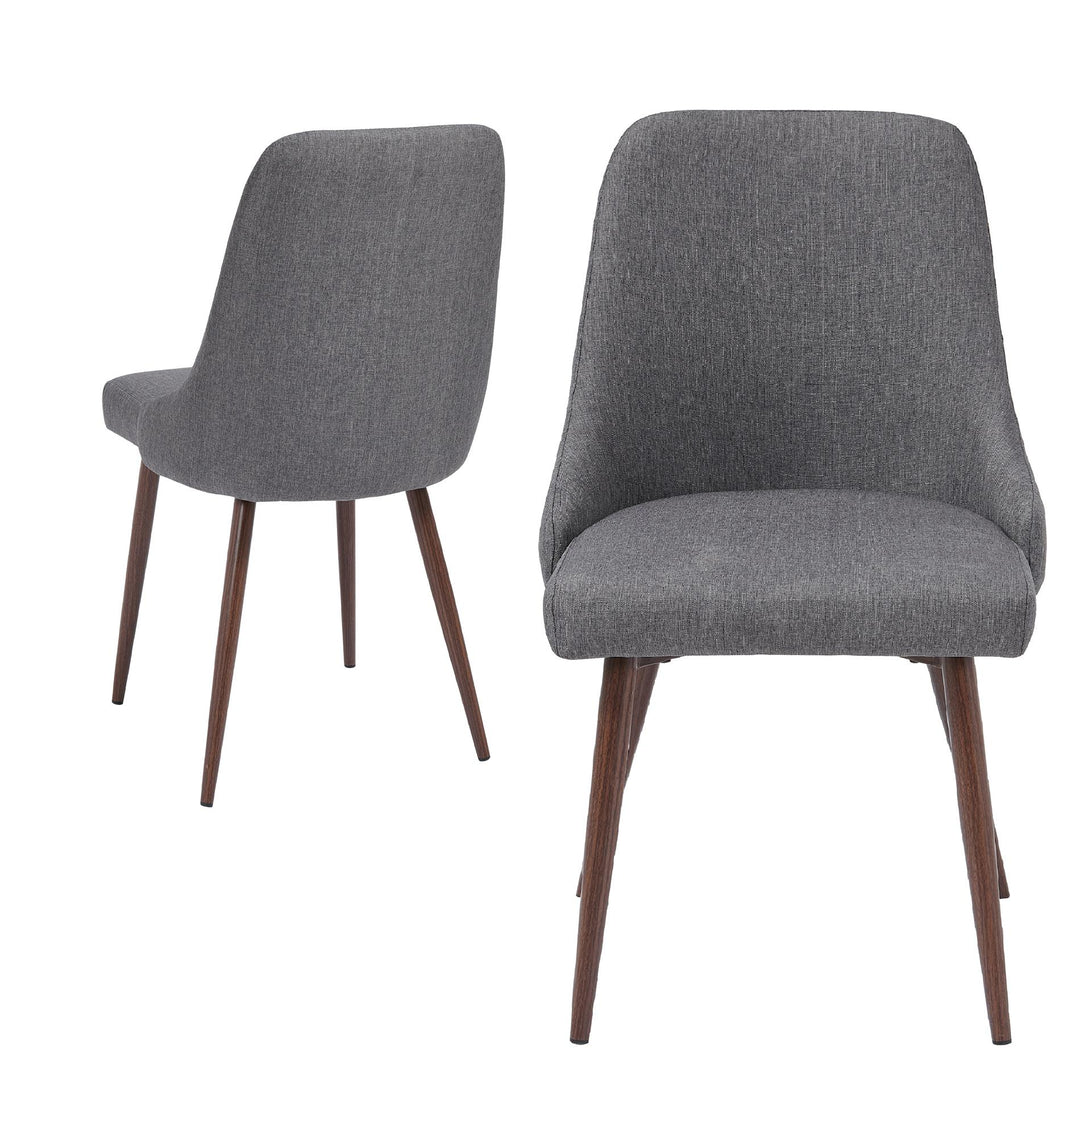 La Perla Upholstered Dining Chair with Wooden Printed Metal Legs, Set of 2 - Gray (Solid)